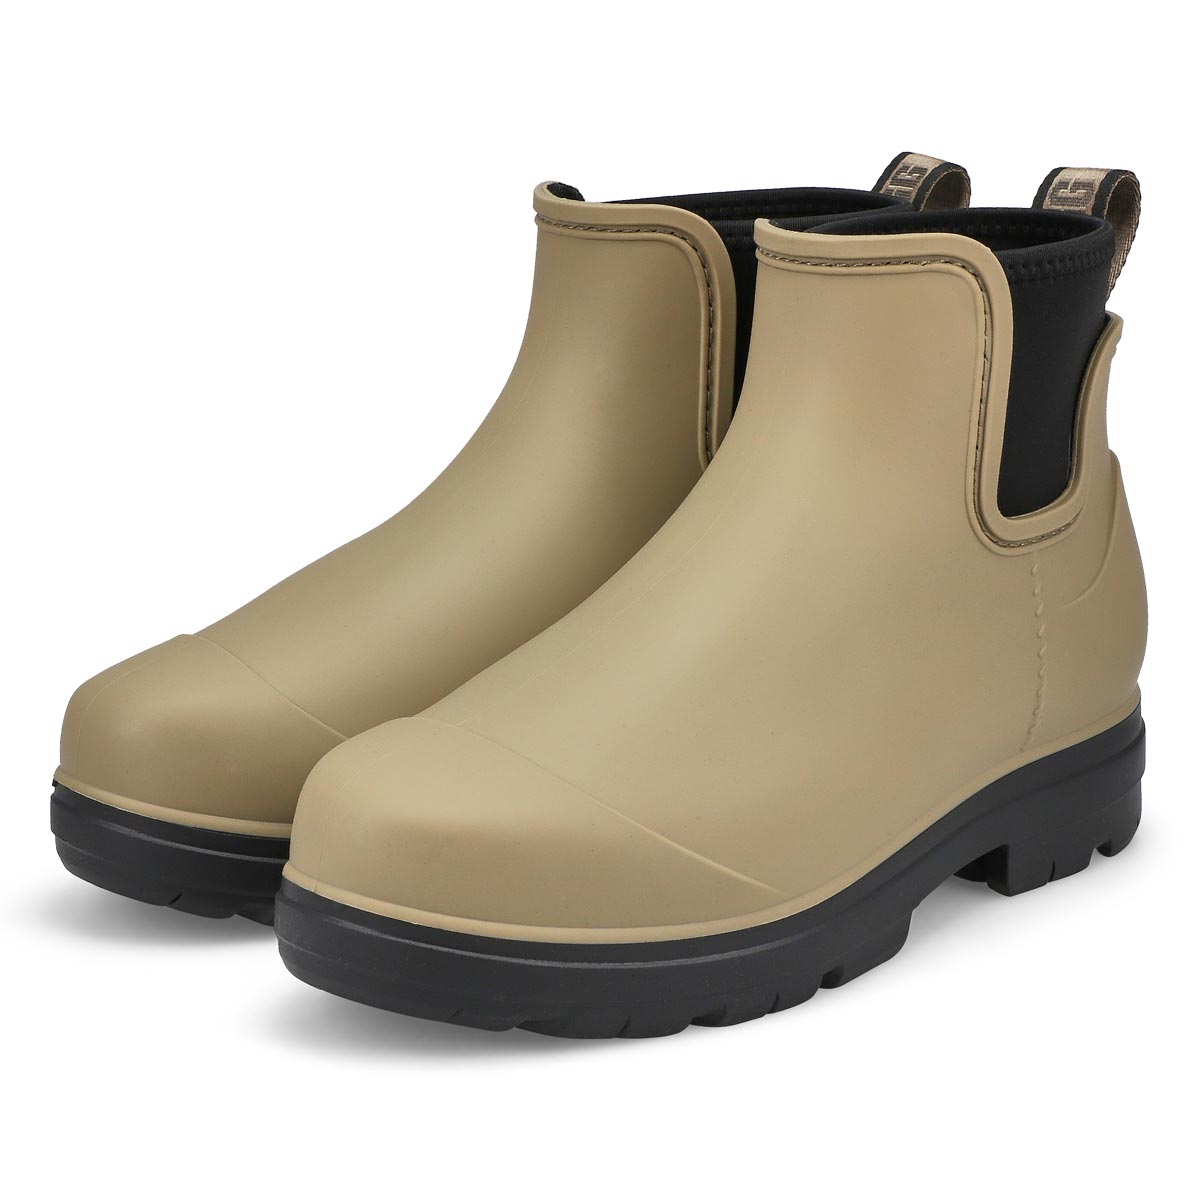 Women's Droplet Chelsea Rain Boot - Taupe